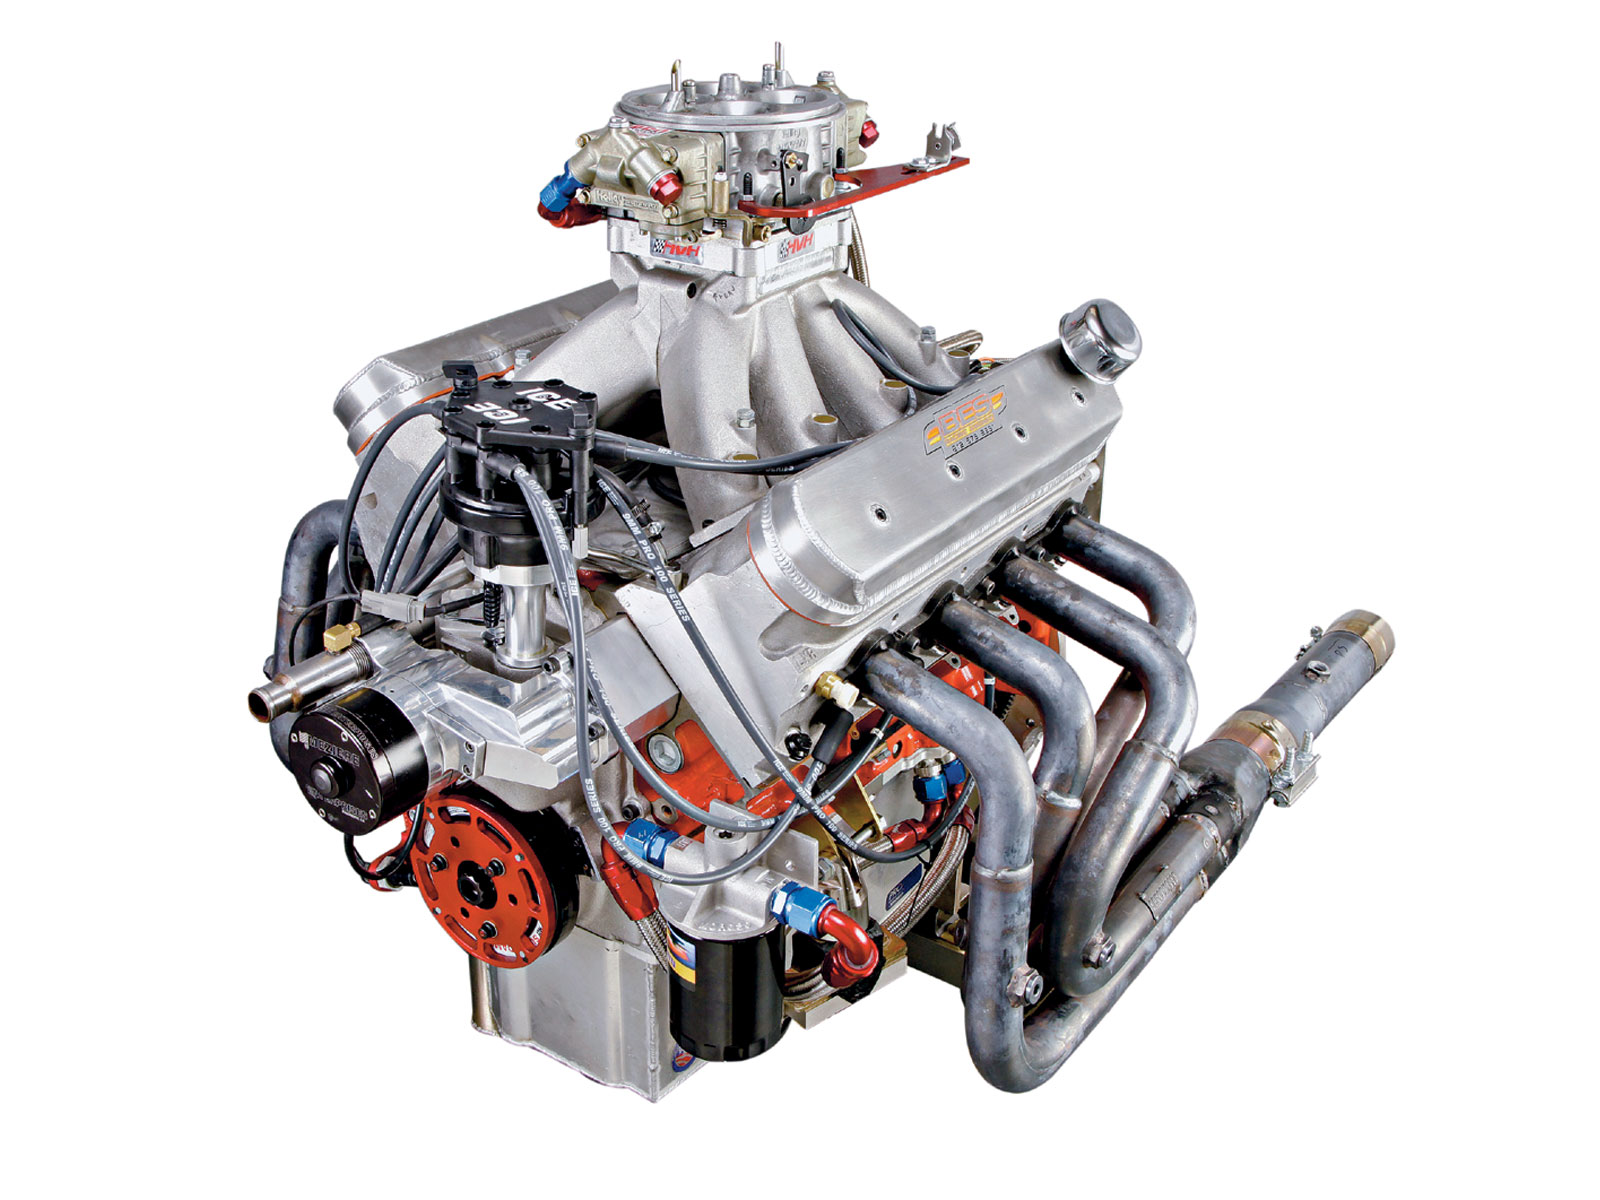 Where can you find automobile engine diagrams?